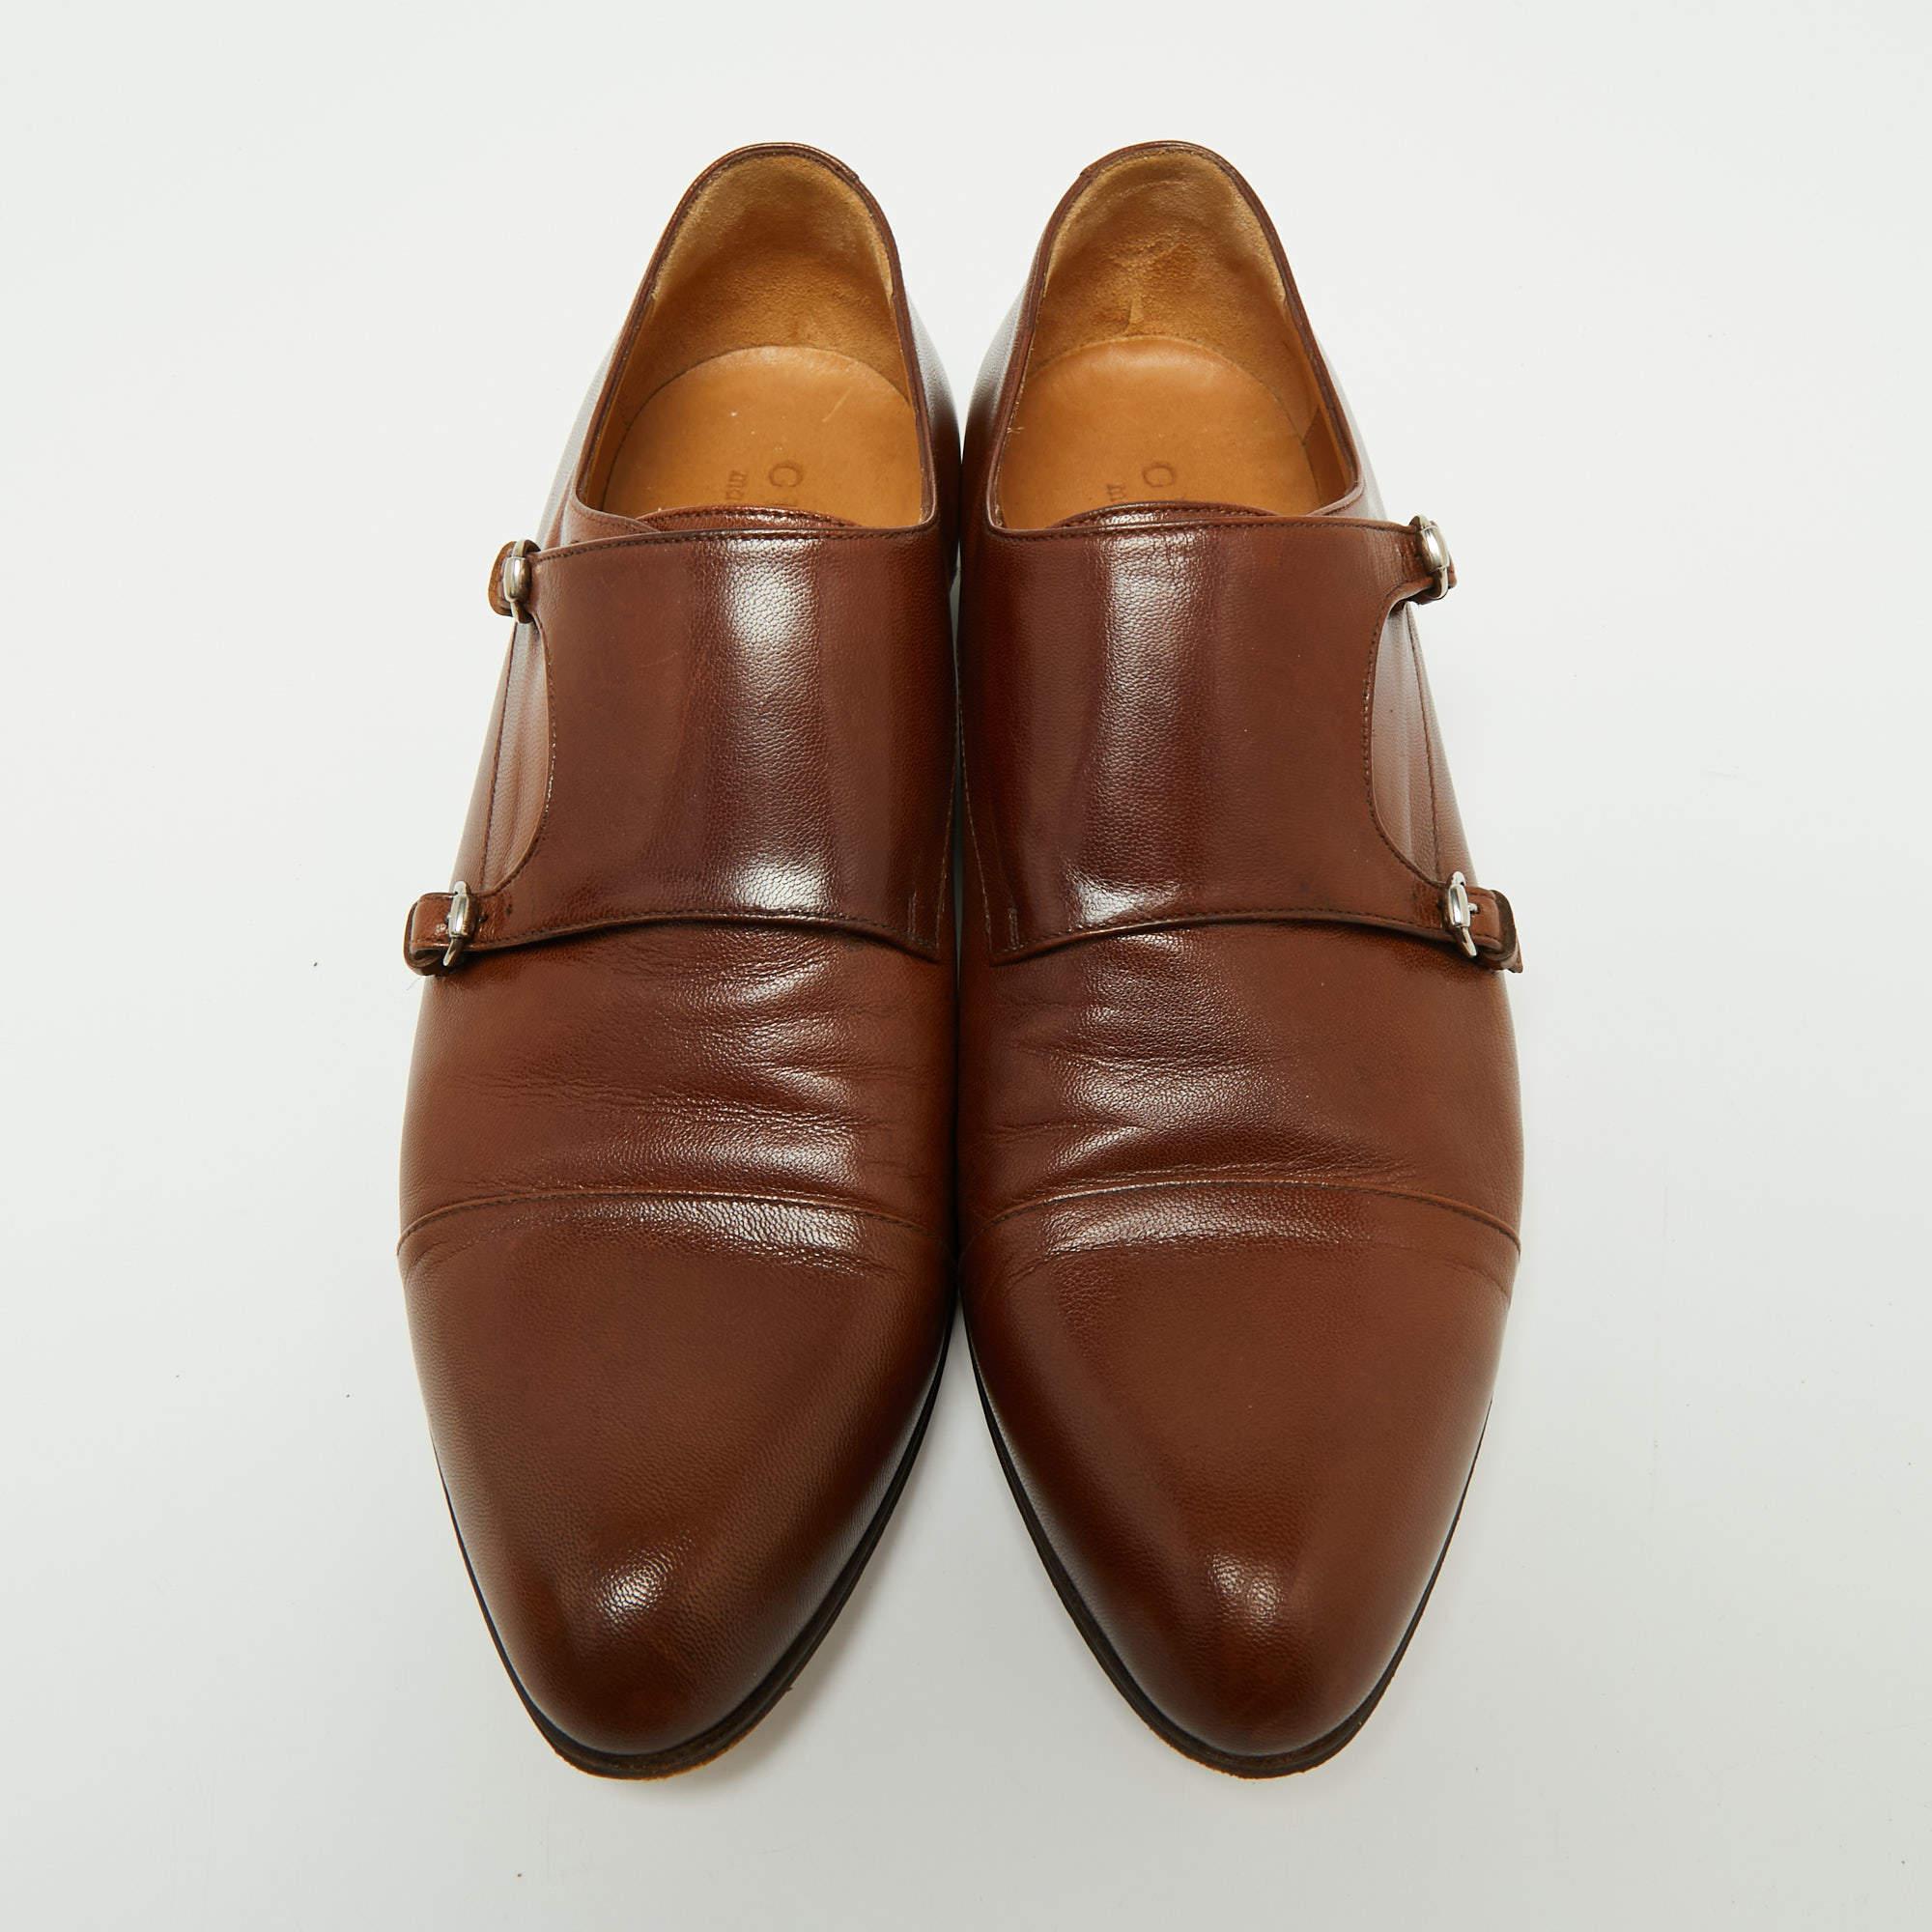 Gucci Brown Leather Double Buckle Monk Strap Oxfords Size 40.5 1